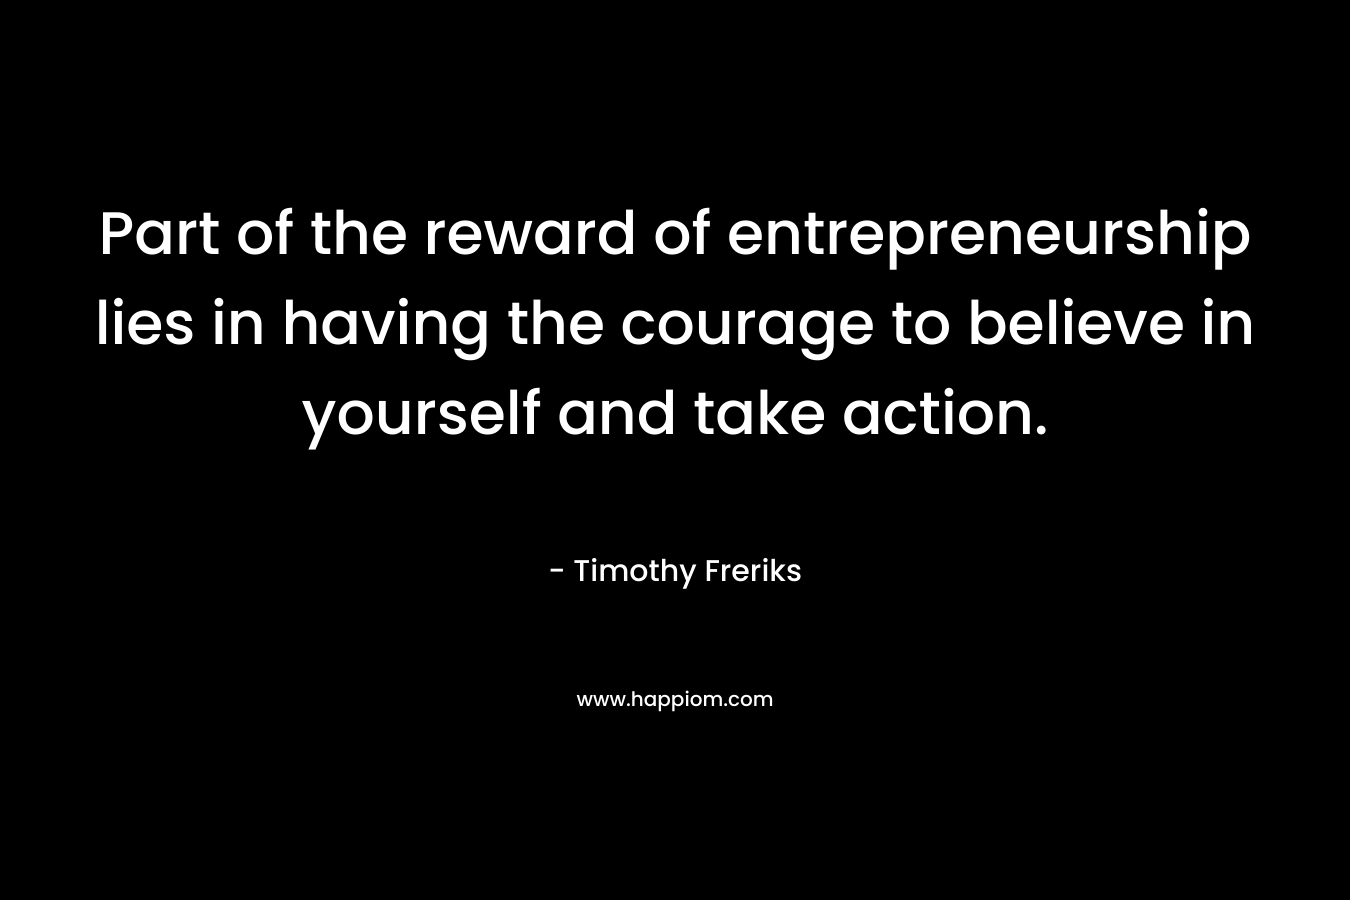 Part of the reward of entrepreneurship lies in having the courage to believe in yourself and take action. – Timothy Freriks